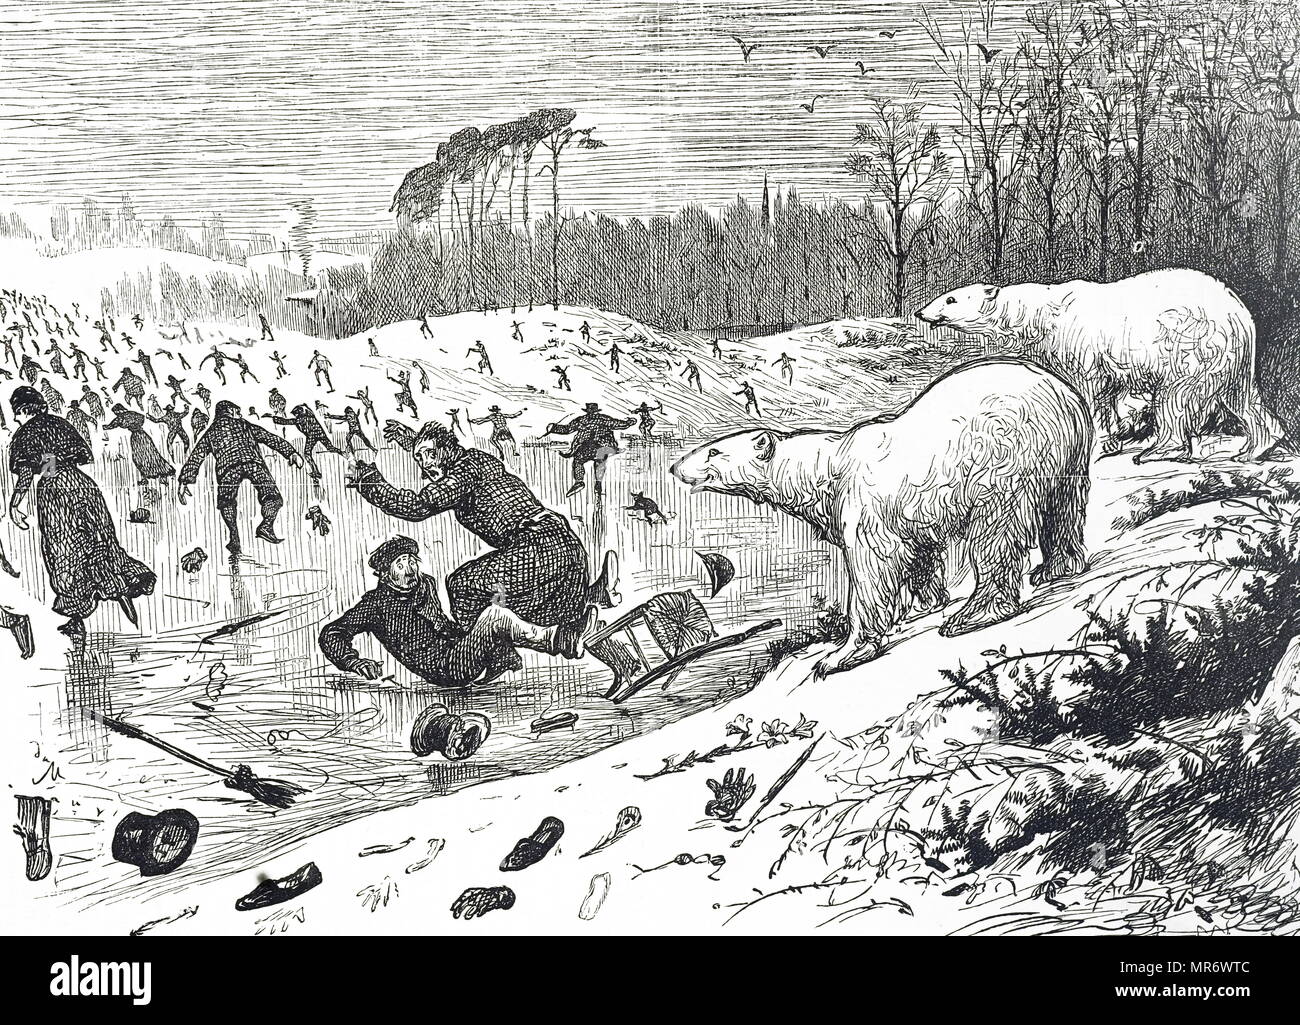 Cartoon depicting Londoners who were convinced that the new Ice Age had begun. The winter of 1880/ was more severe than usual in Britain which sparked these theories. Illustrated by George du Maurier (1834-1896) a Franco-British cartoonist and author. Dated 19th century Stock Photo